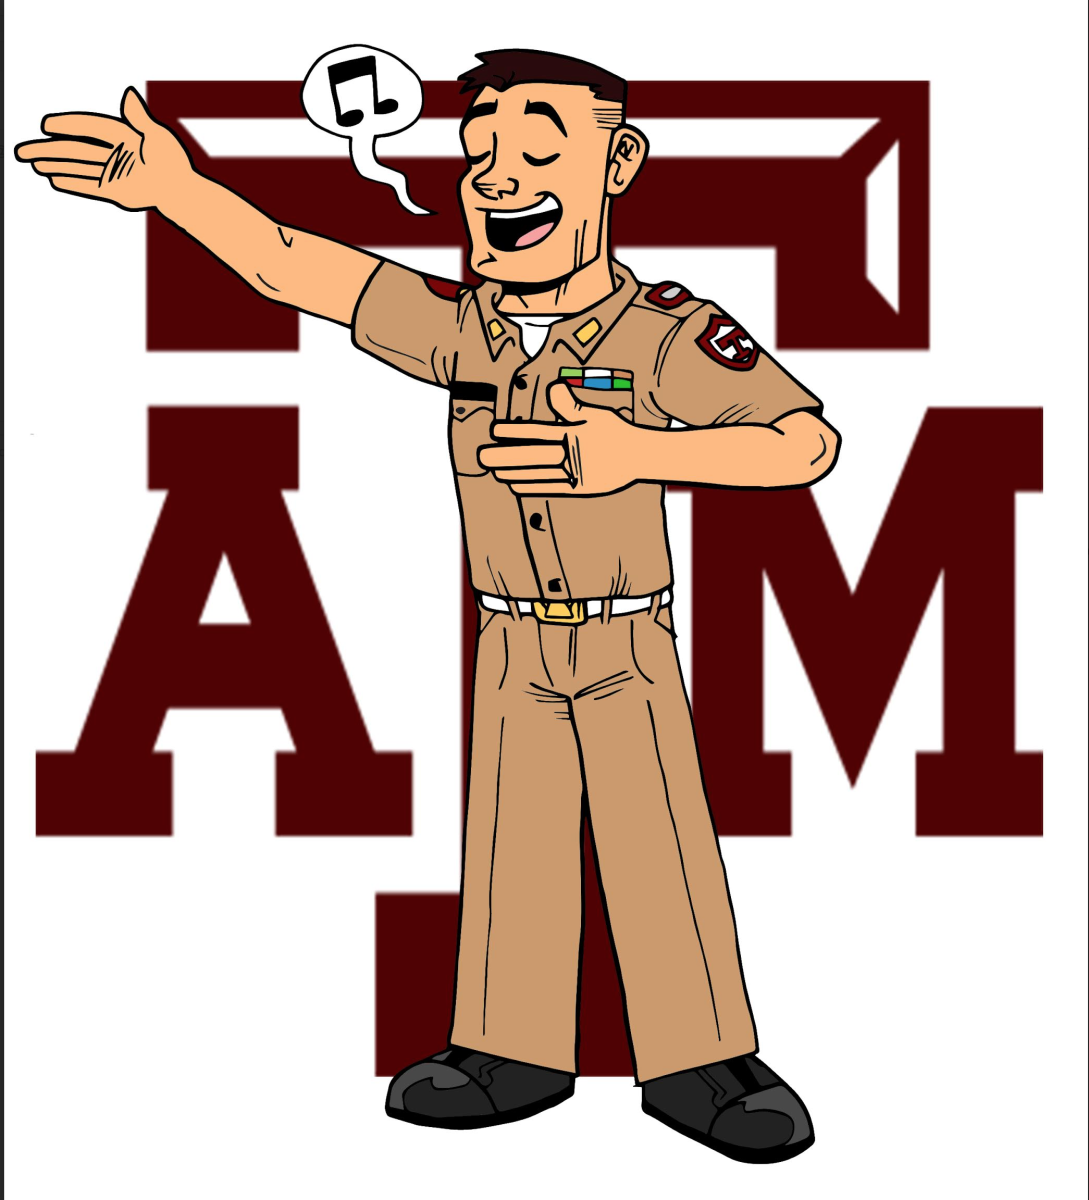 The musical is the first of its kind to lampoon Texas A&M and the Corps of Cadets culture.